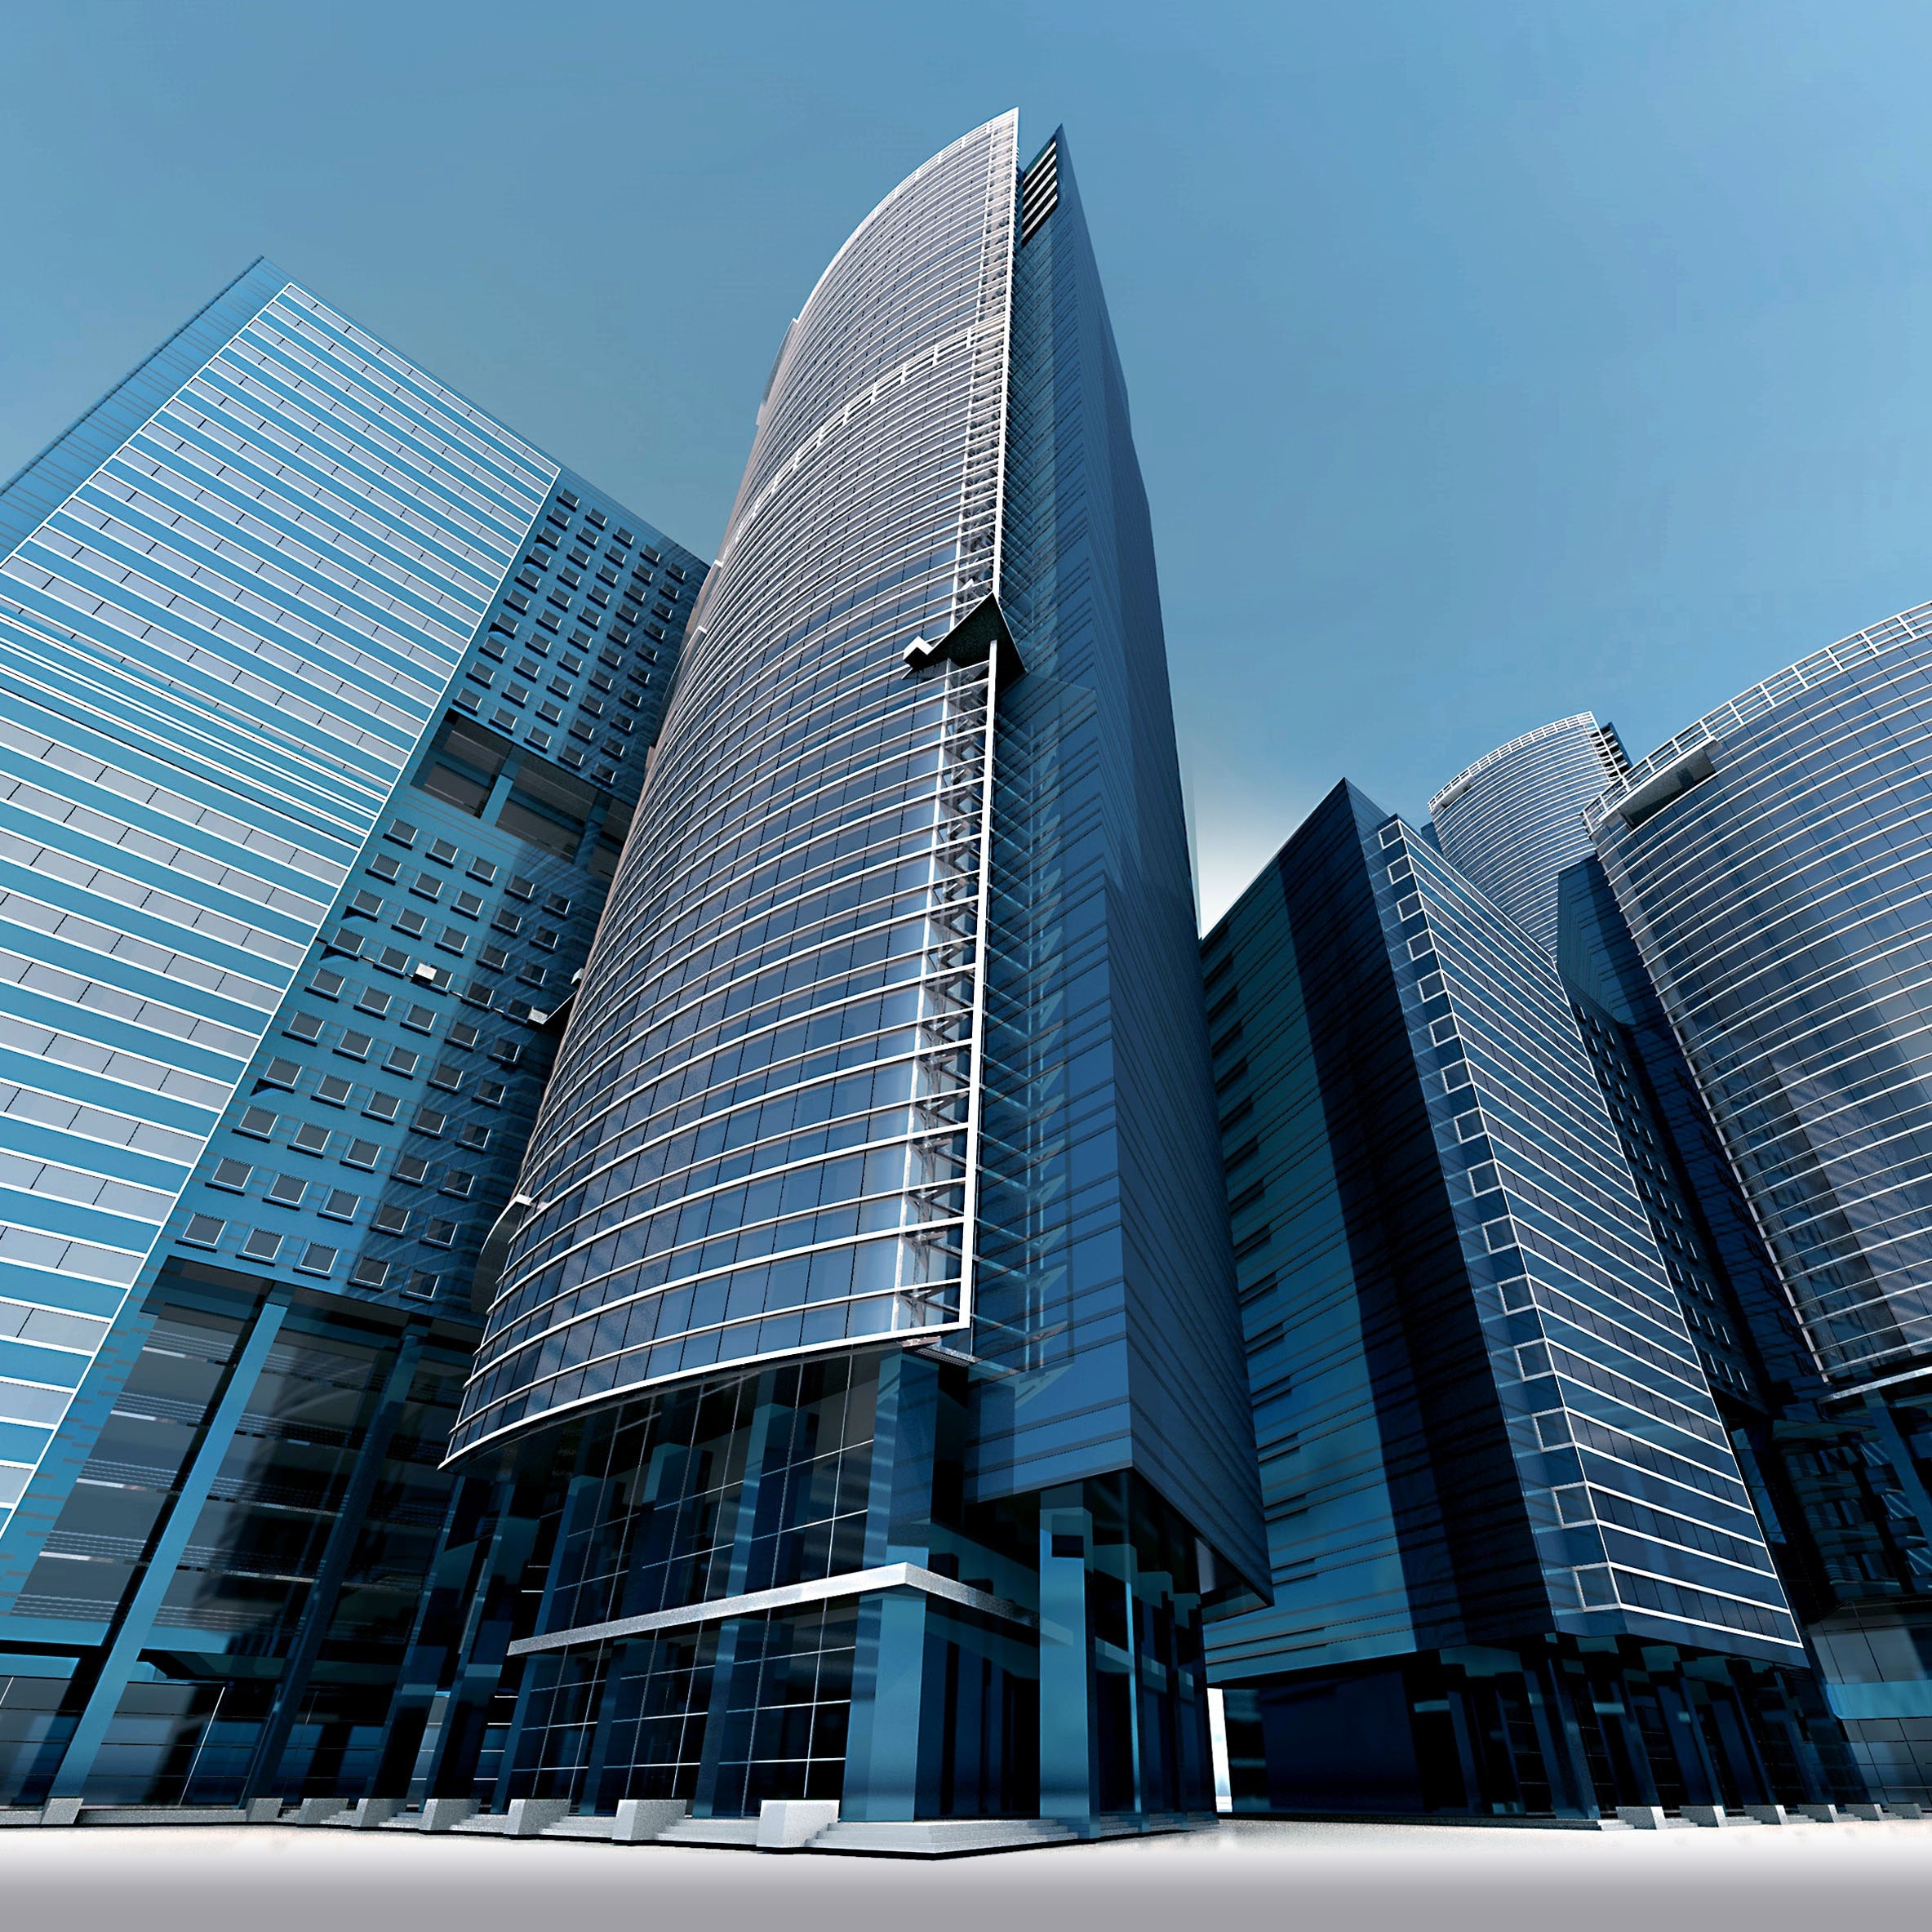 exterior of a tall glass office building